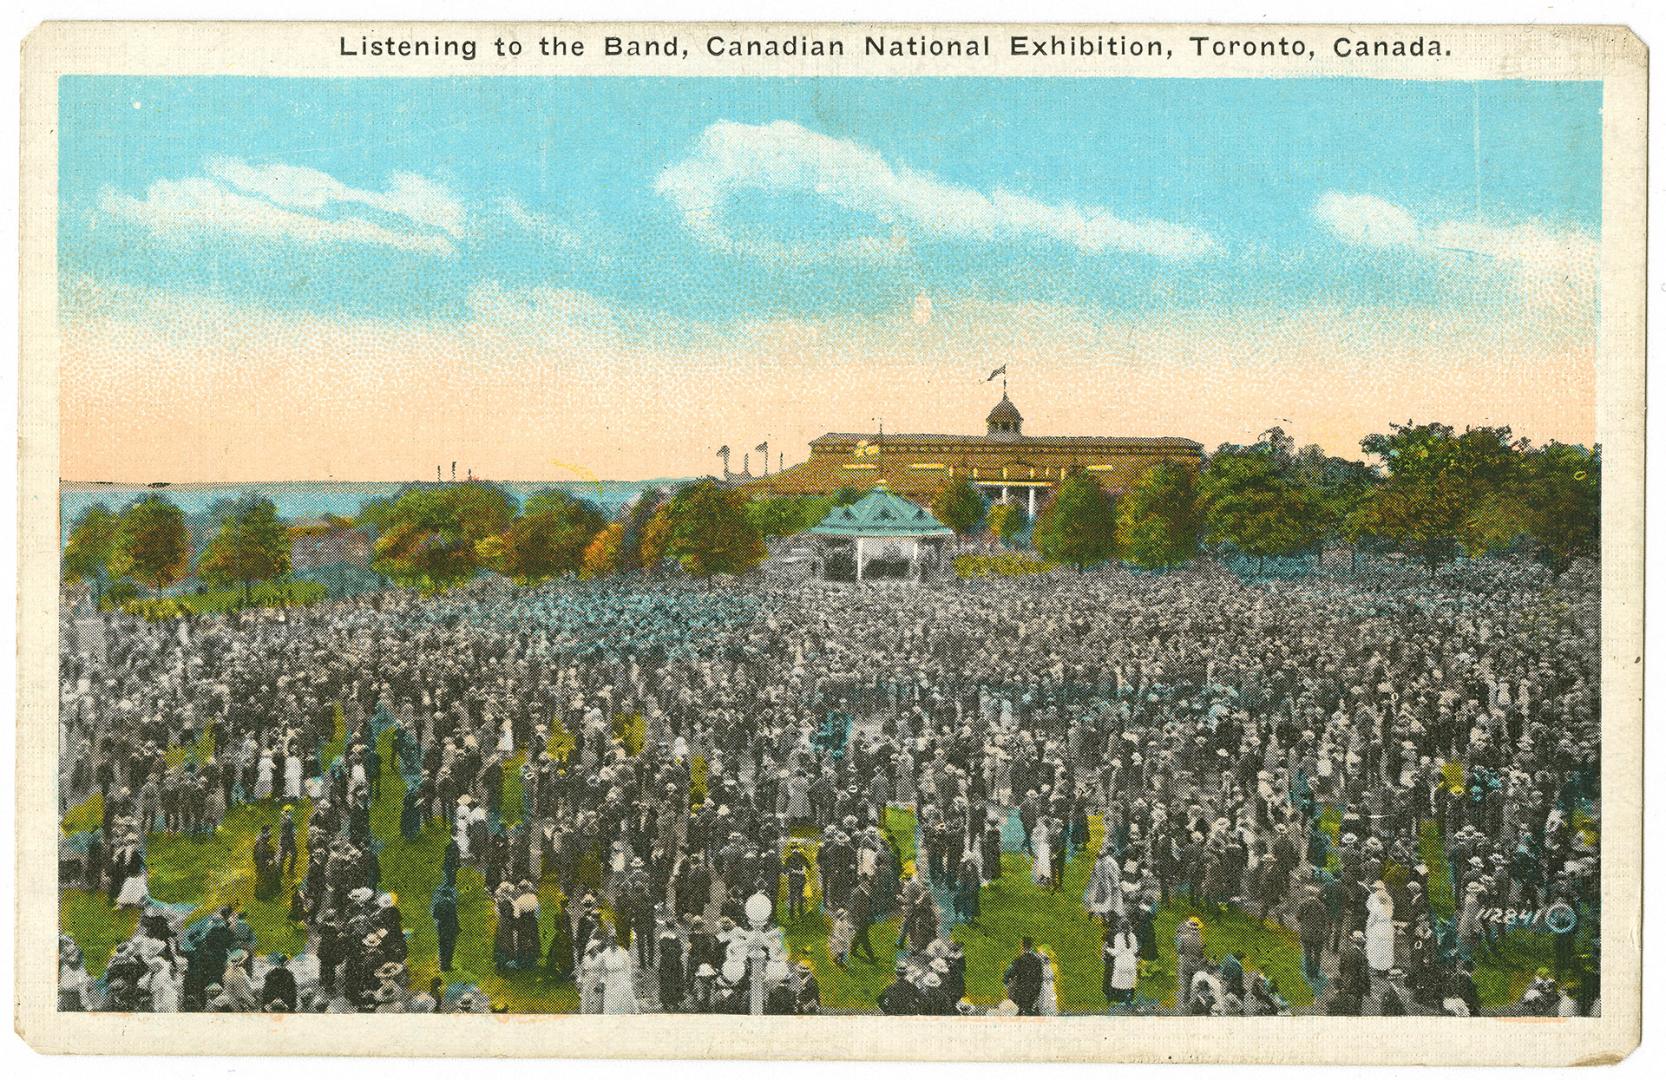 Listening to the Band, Canadian National Exhibition, Toronto, Canada